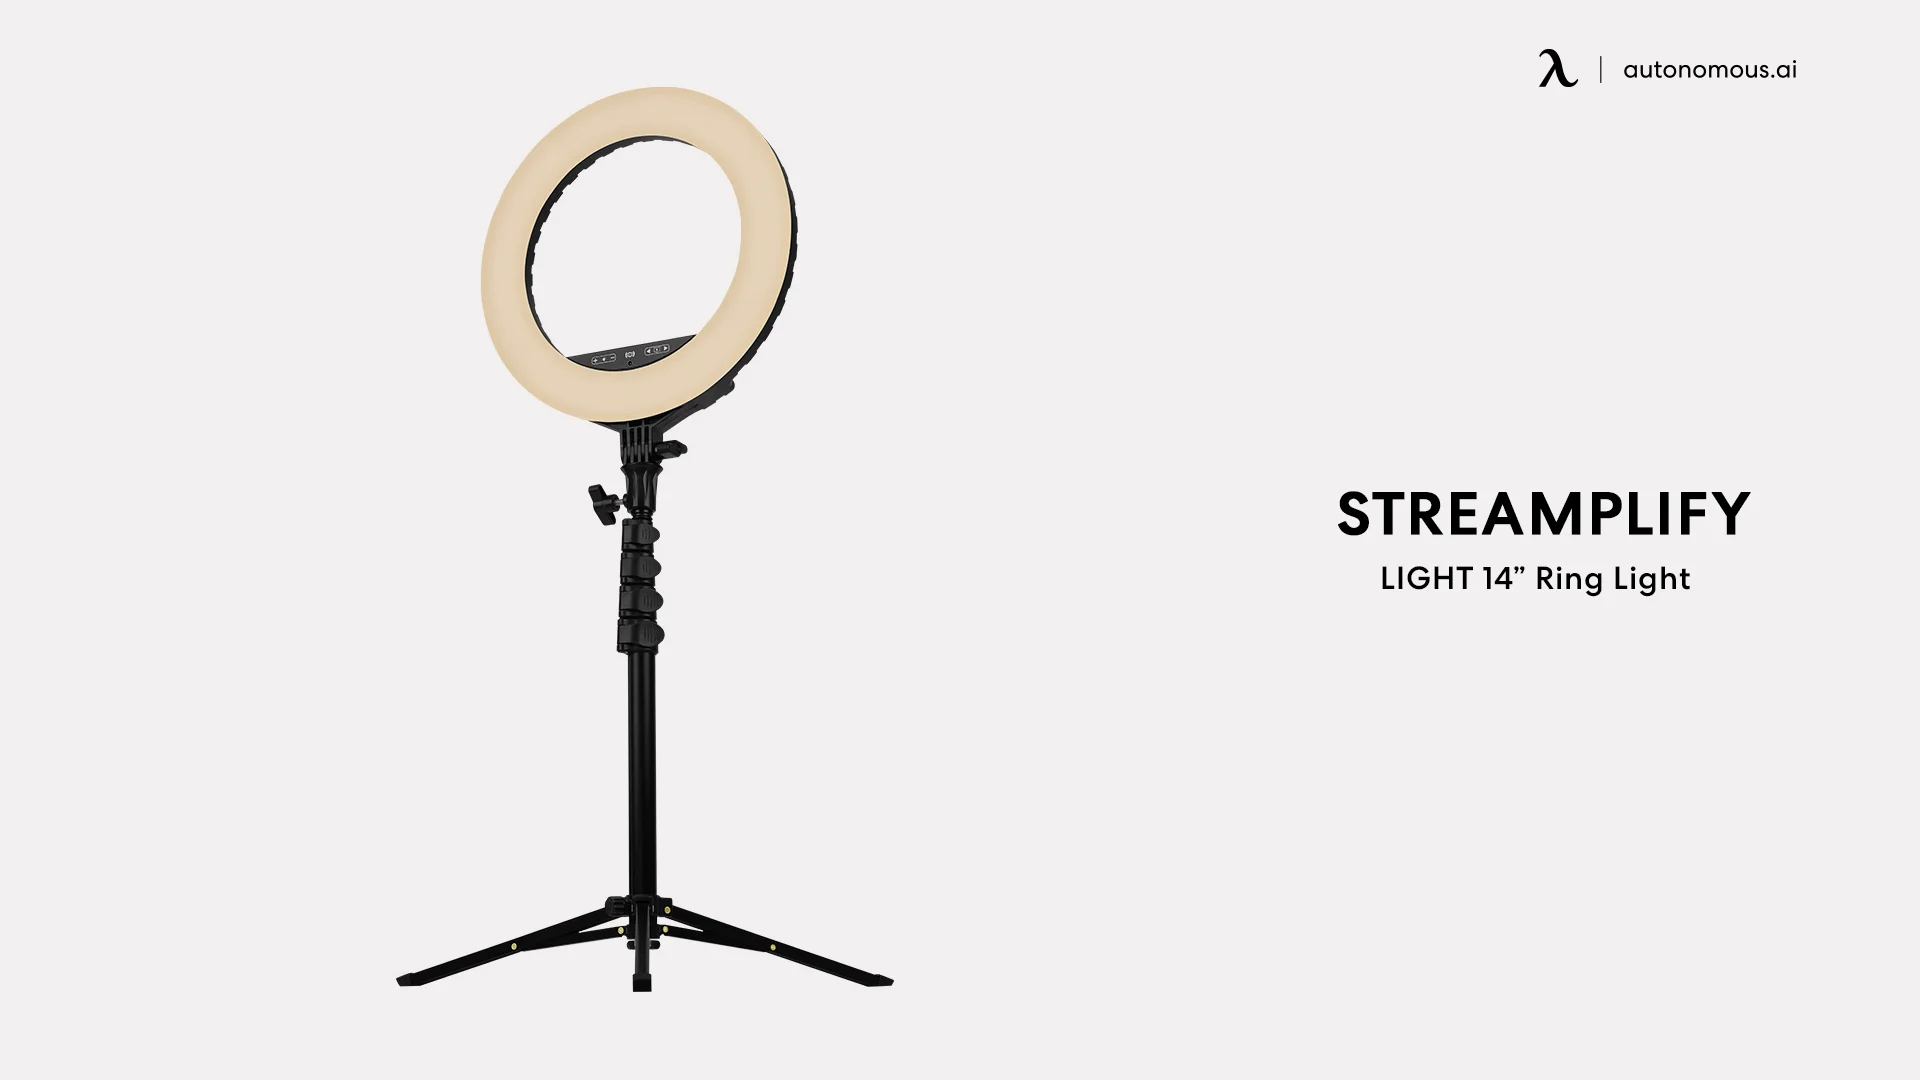 Streamplify LIGHT 14” Ring Light - gaming computer accessories